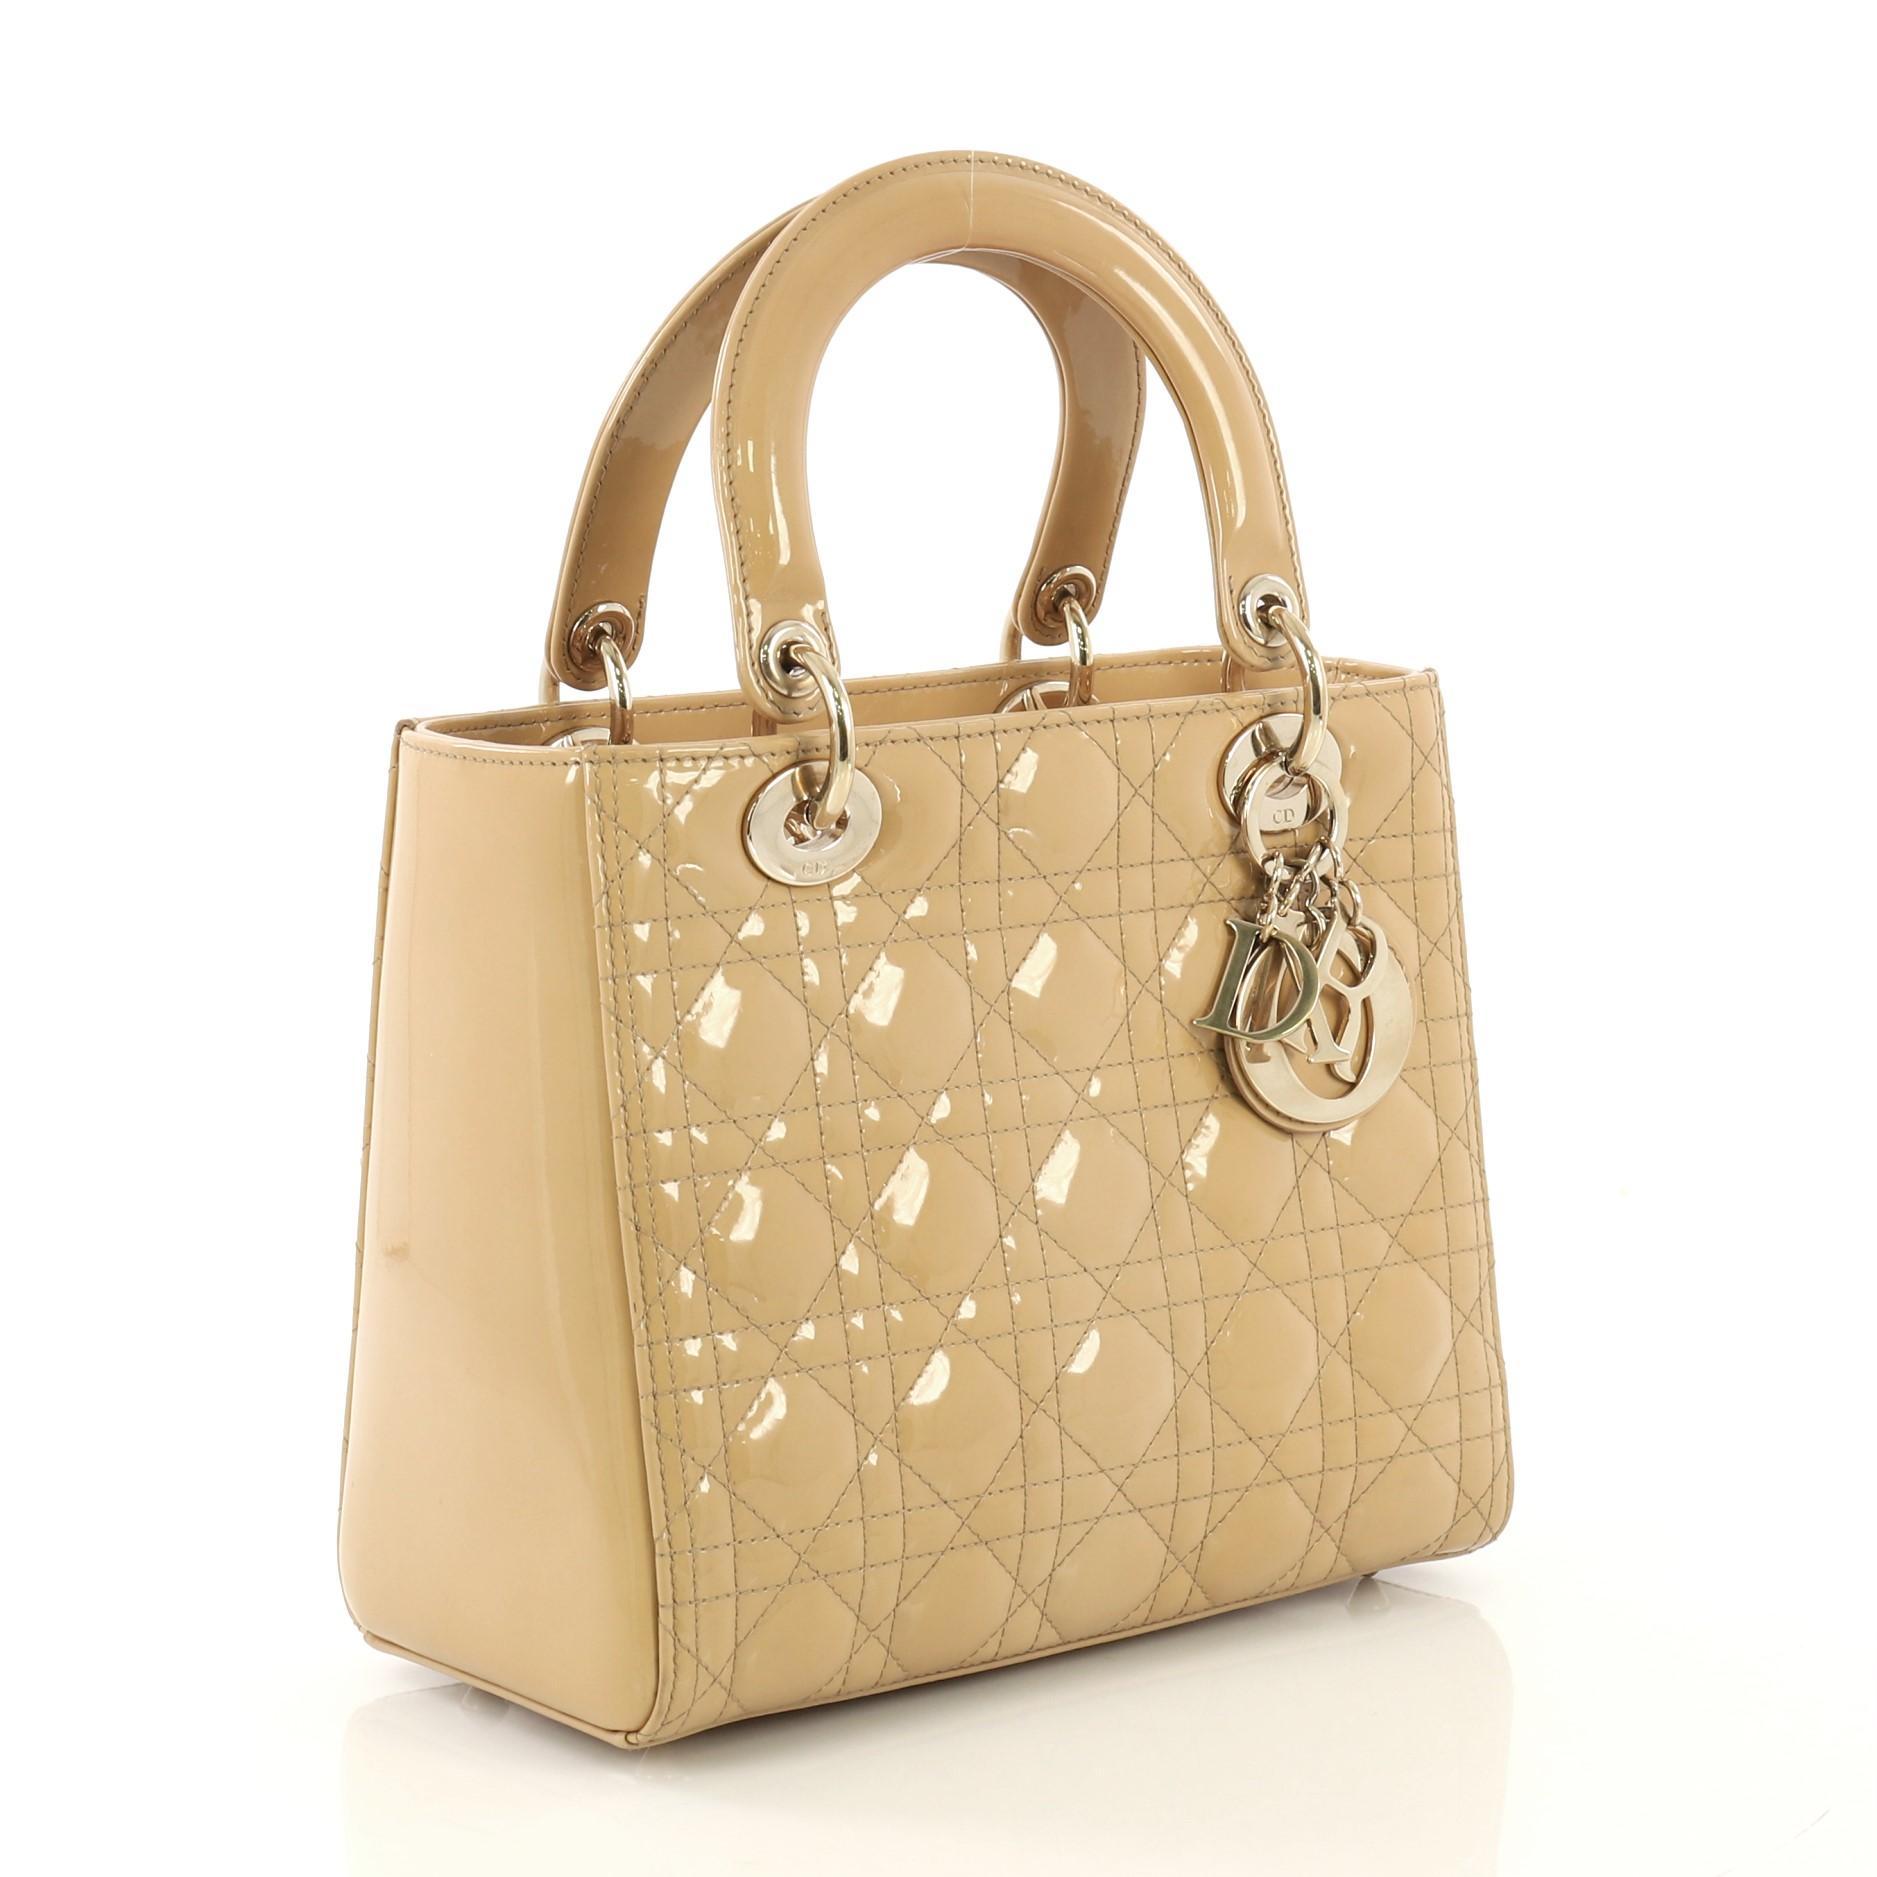 This Christian Dior Lady Dior Handbag Cannage Quilt Patent Medium, crafted in beige cannage quilt patent, features dual top leather handles, Dior charms, and gold-tone hardware. Its zip closure opens to a beige fabric interior with side zip pocket.